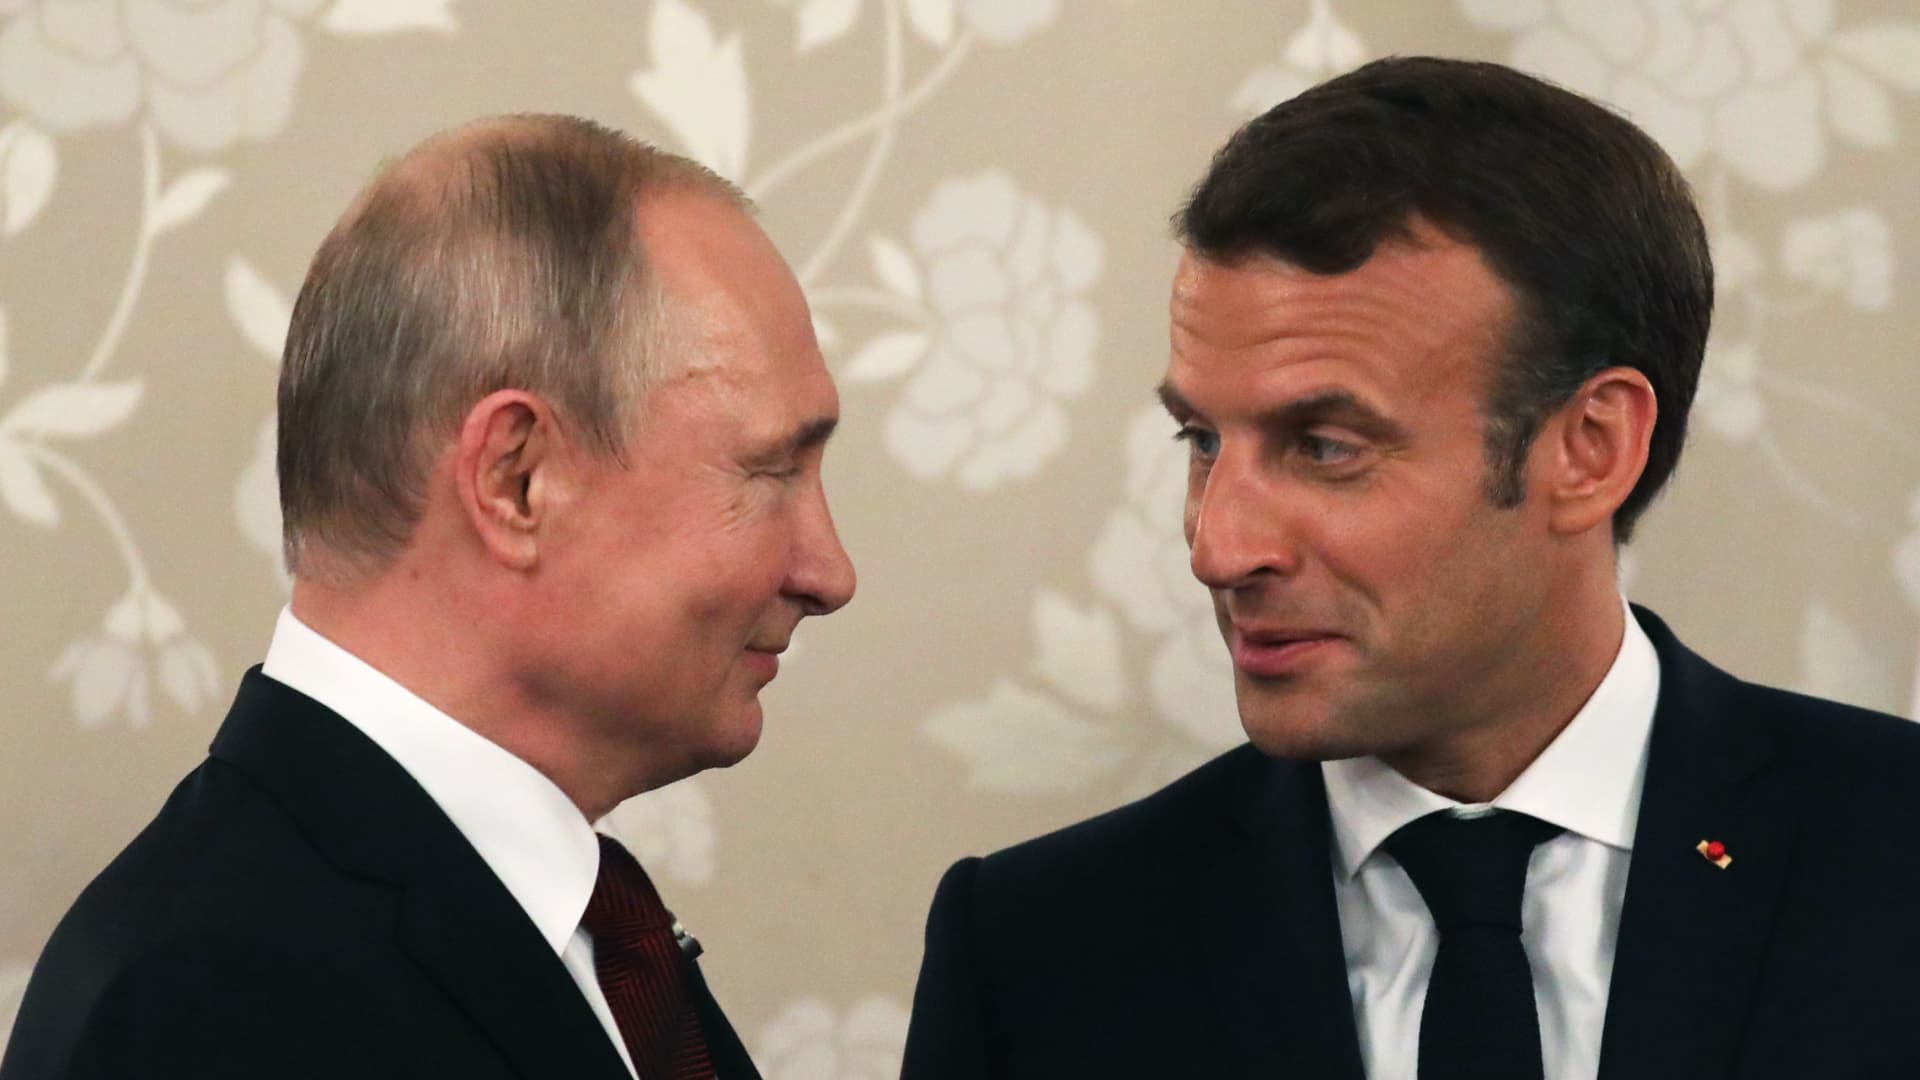 France's Macron meets Russia's Putin to discuss ongoing war in Ukraine